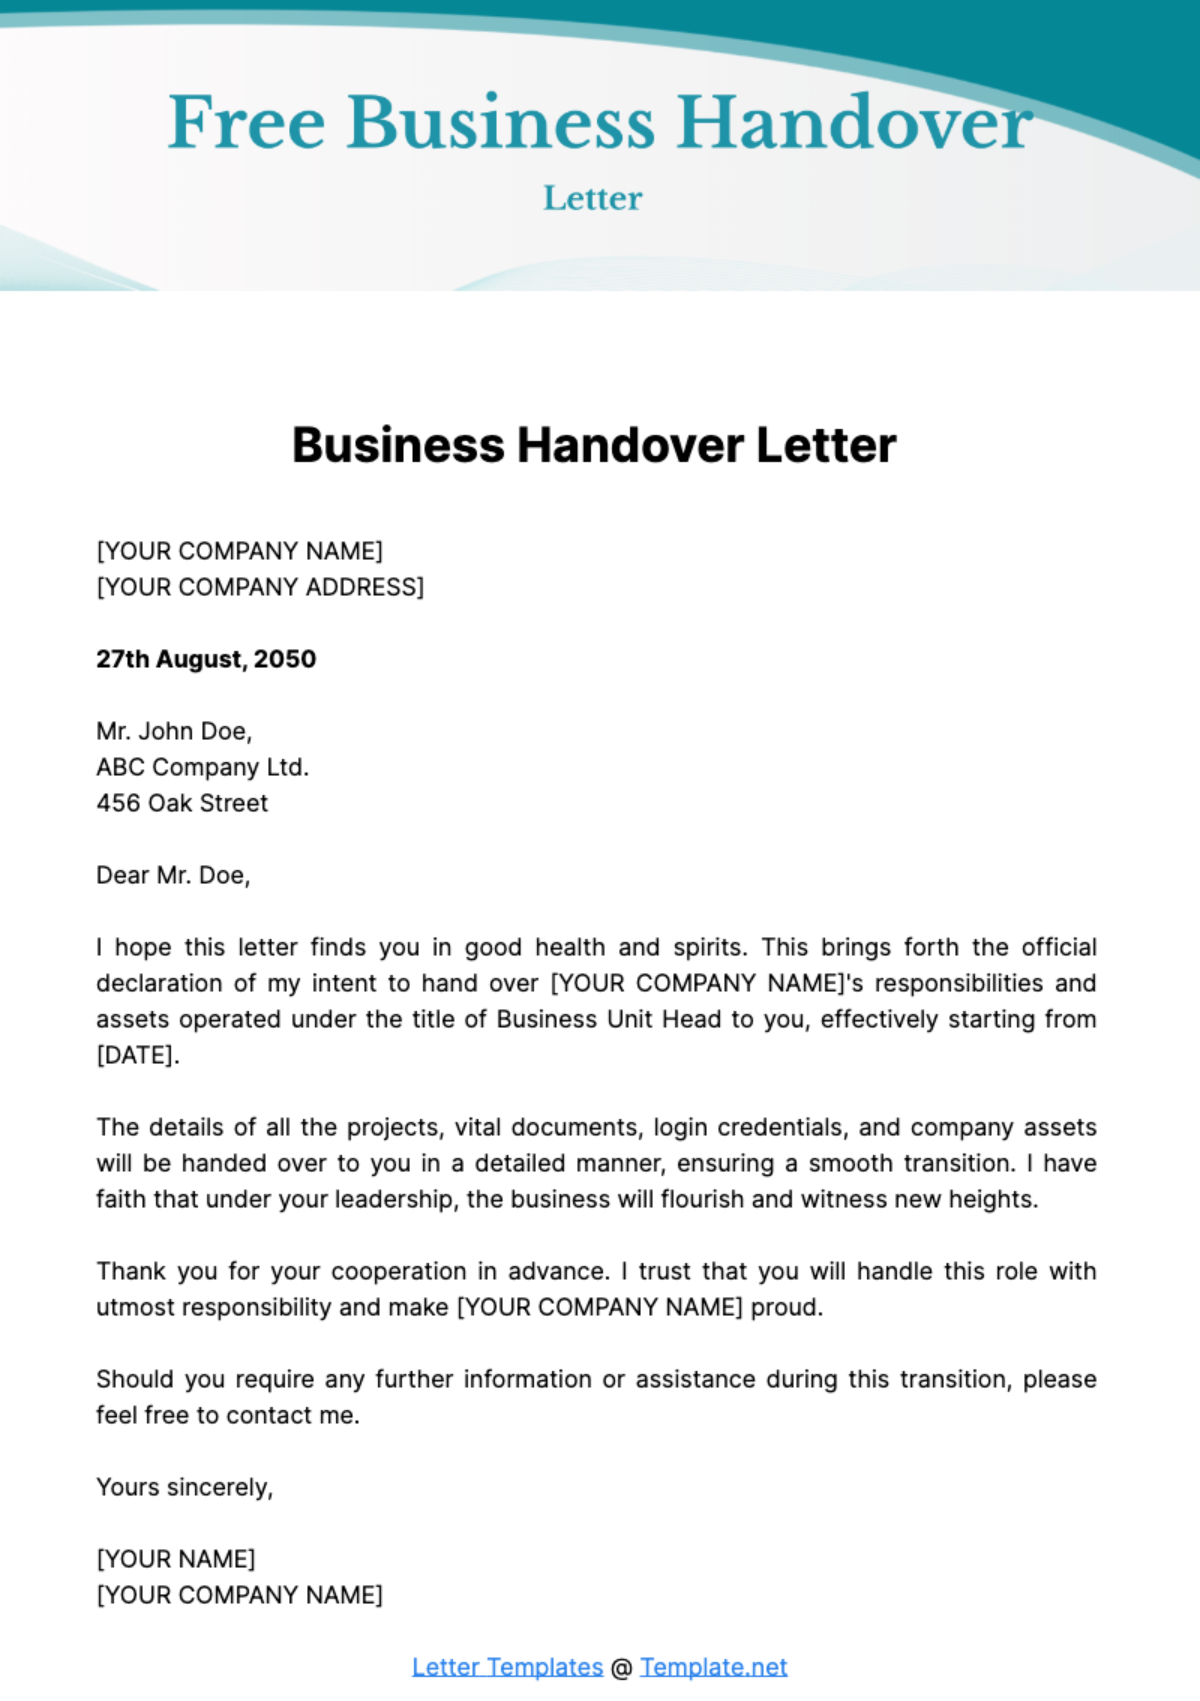 Free Business Handover Letter Template